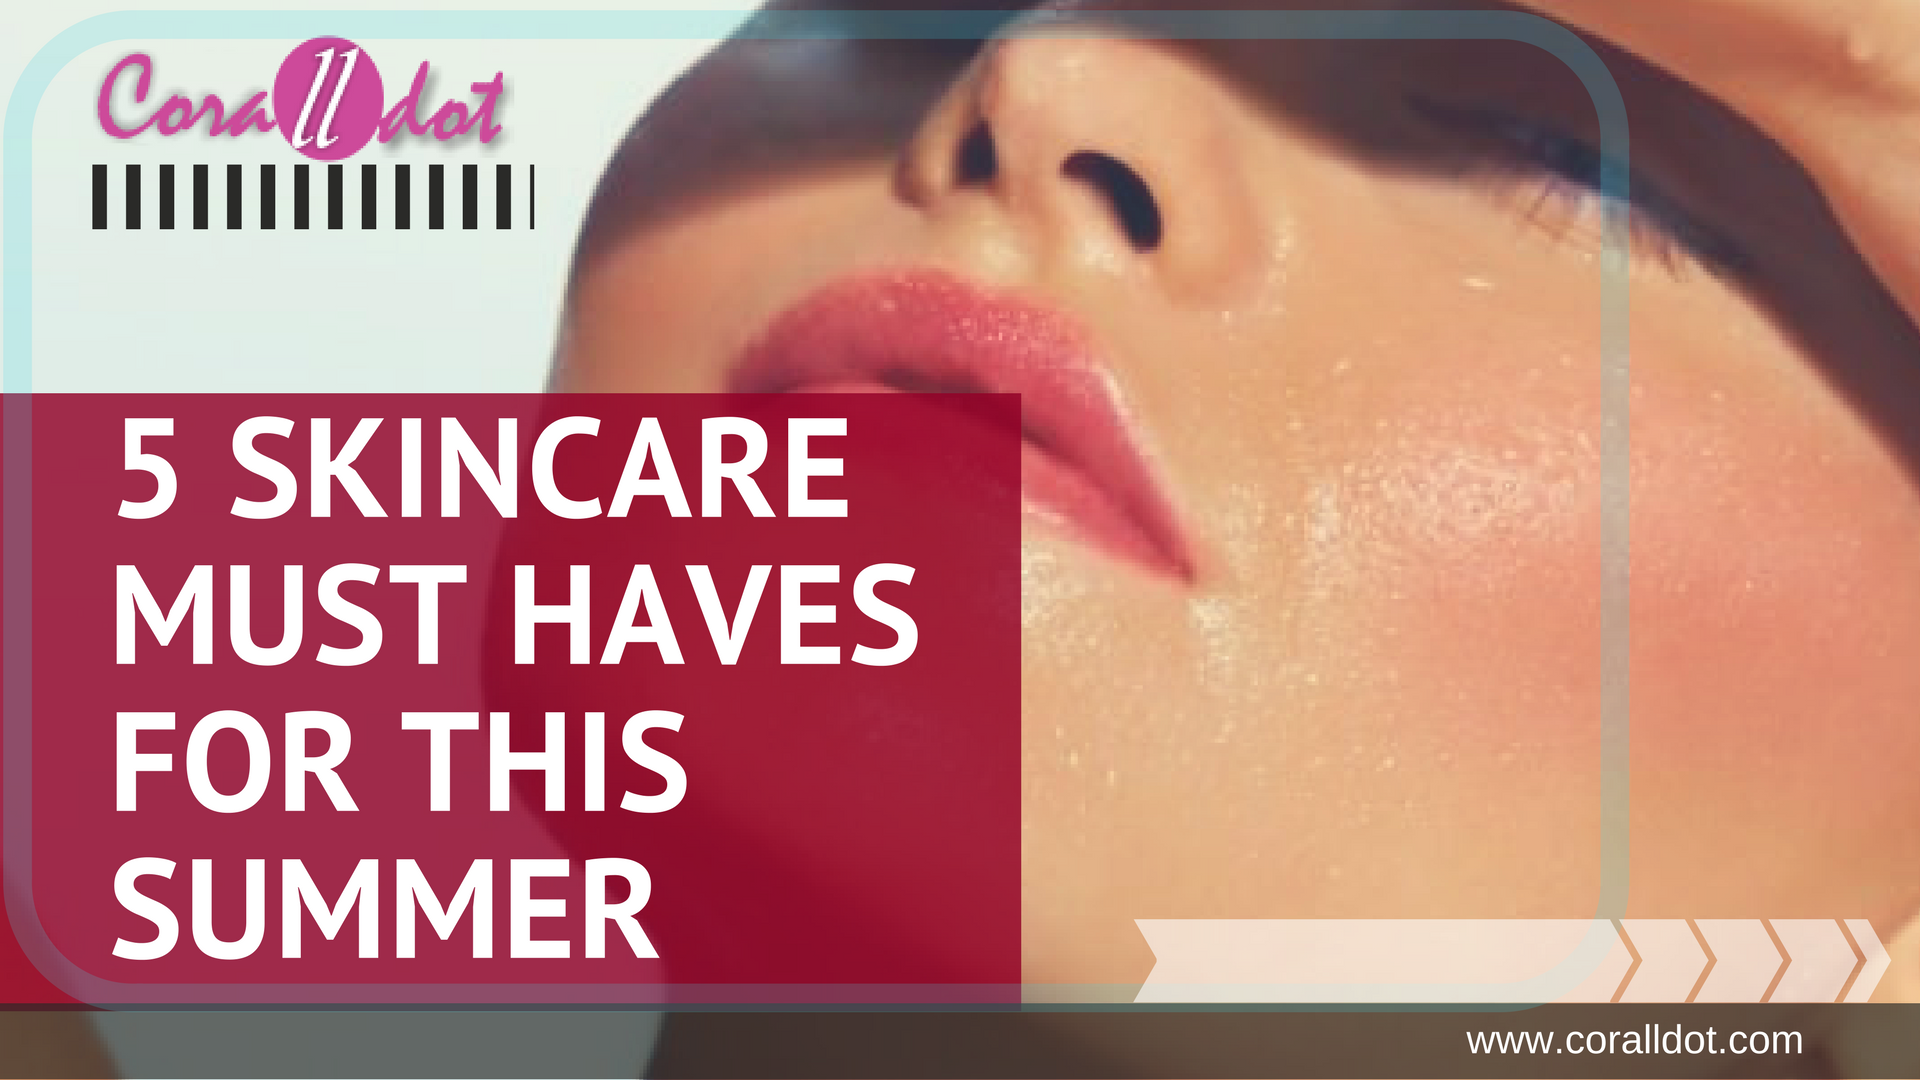 Five skincare must haves for this summer